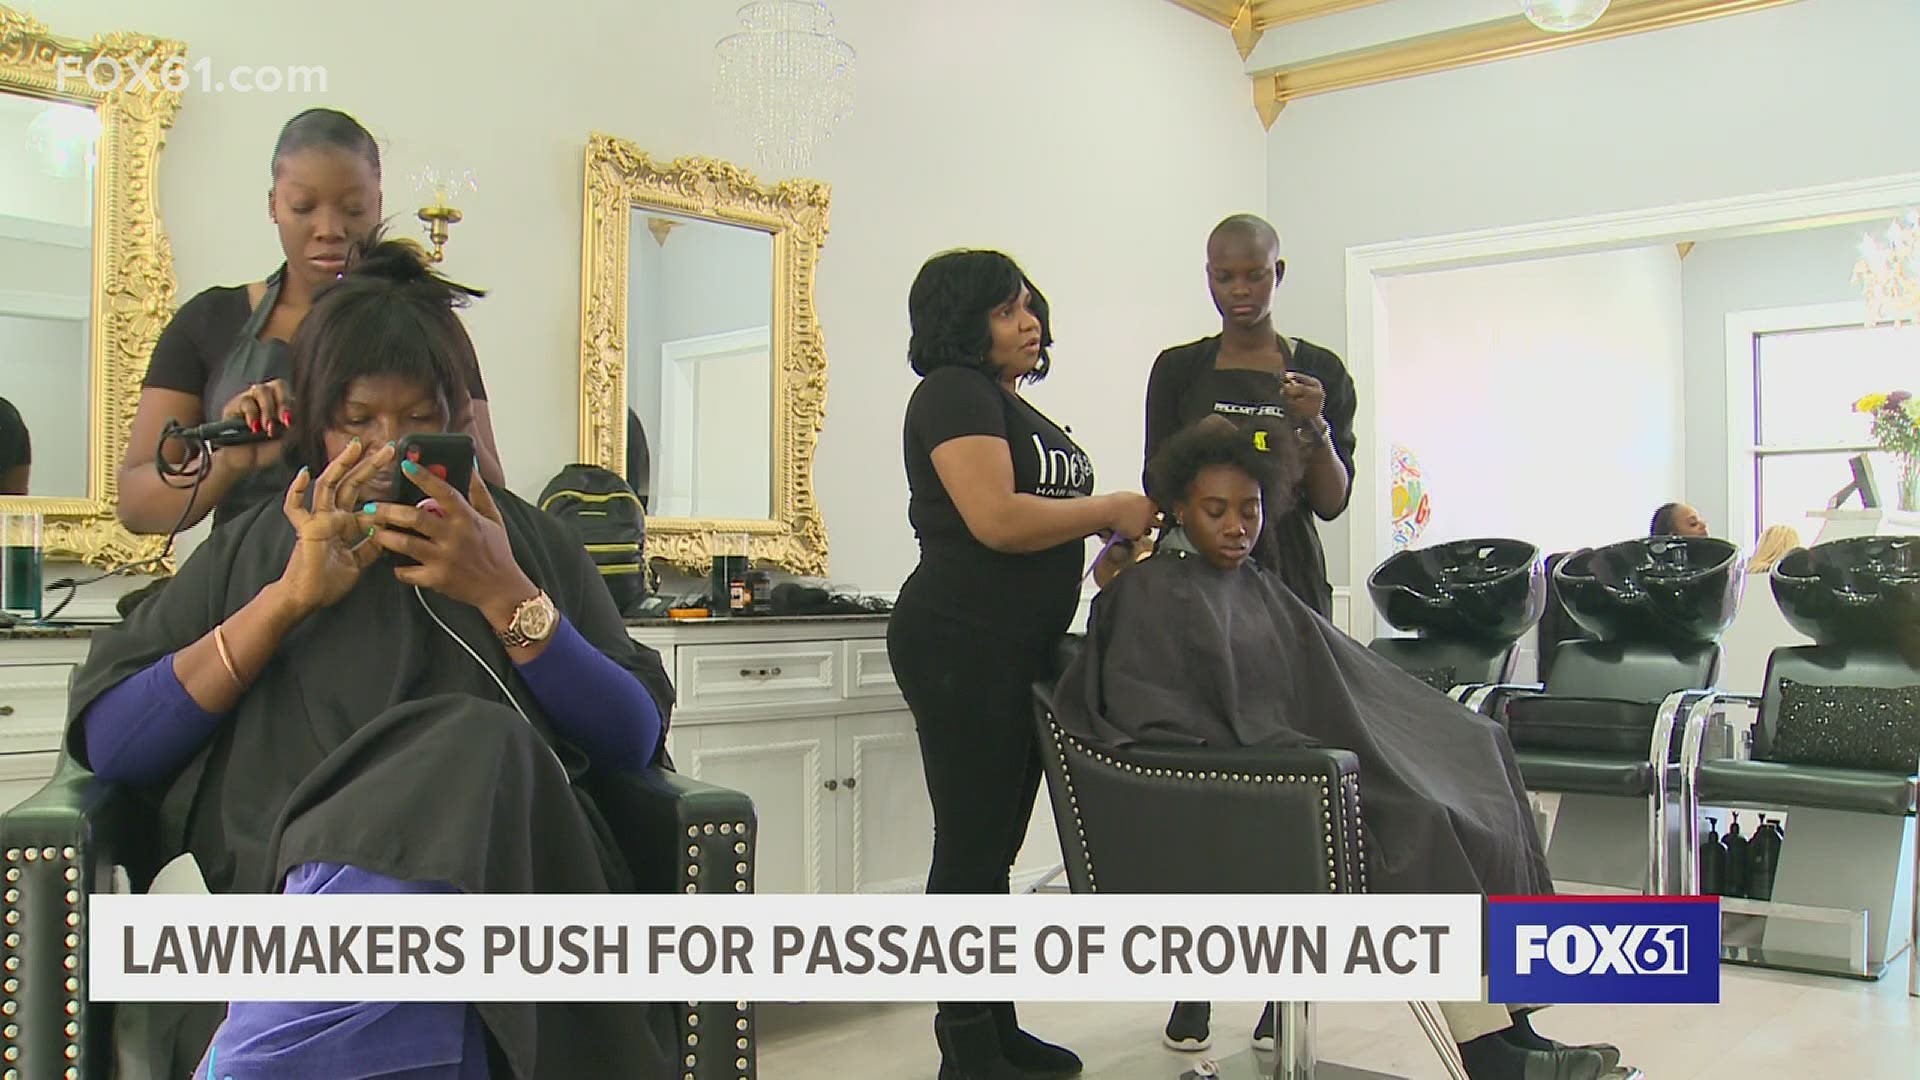 Rep. Robyn Porter has re-introduced The Crown Act- which would make it illegal to discriminate based on hair styles that are historically associated with race